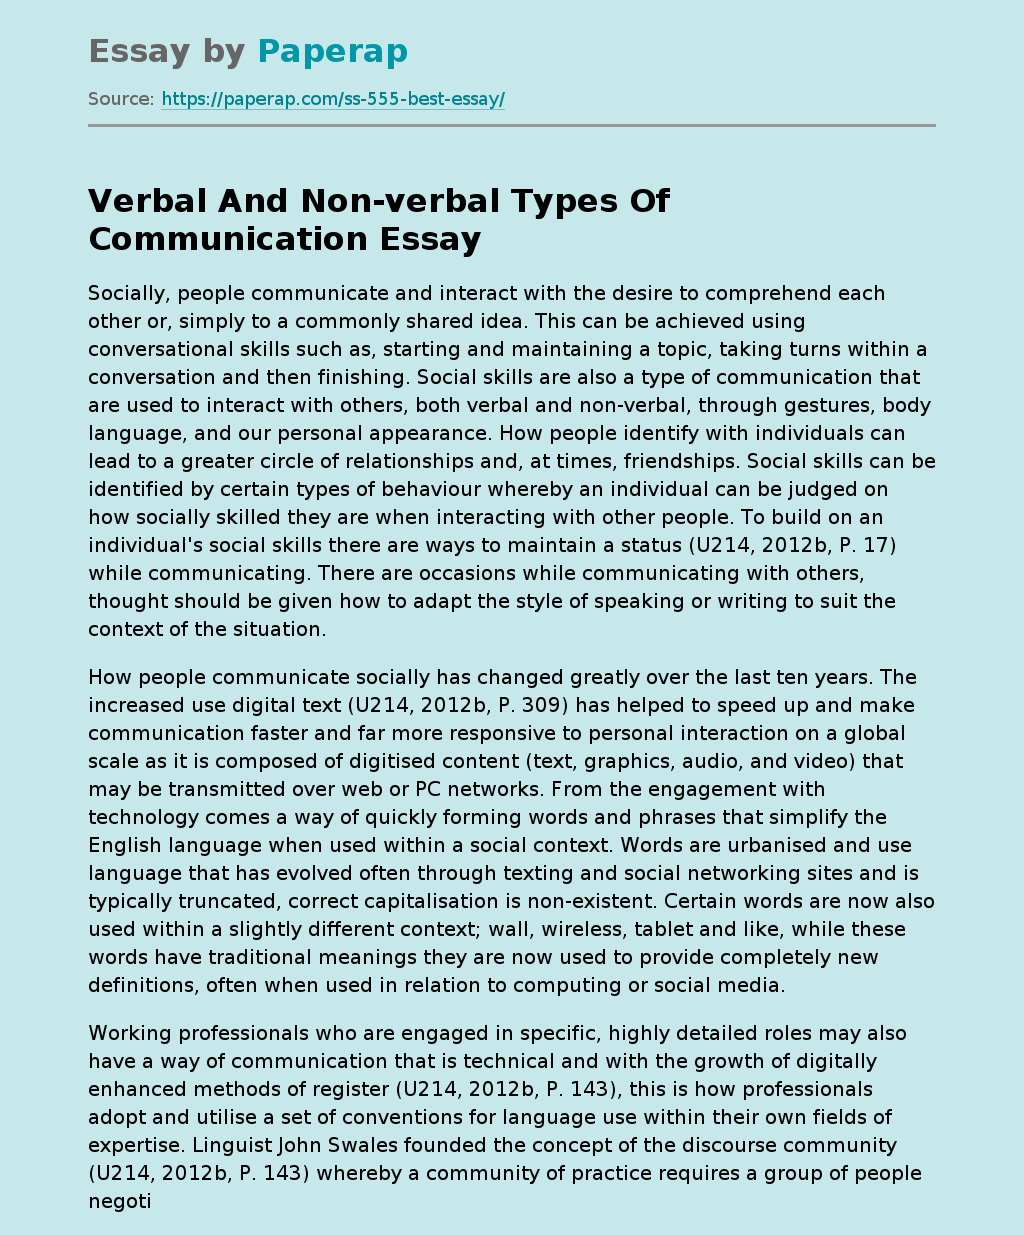 Verbal And Non-verbal Types Of Communication